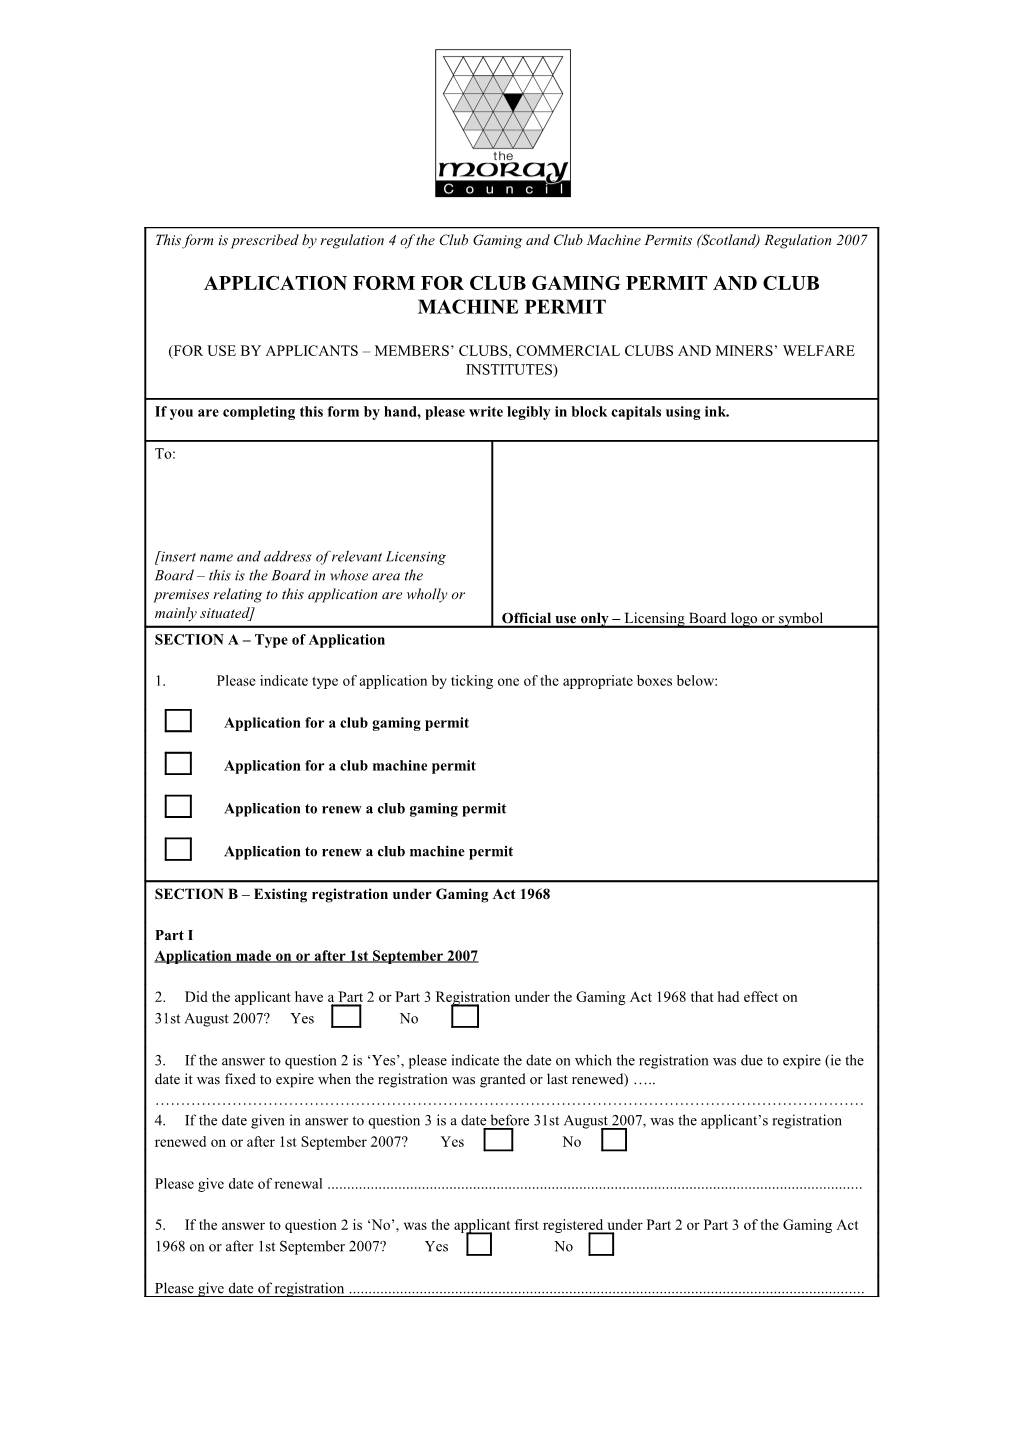 This Form Is Prescribed by Regulation 4 of the Club Gaming and Club Machine Permits (Scotland)